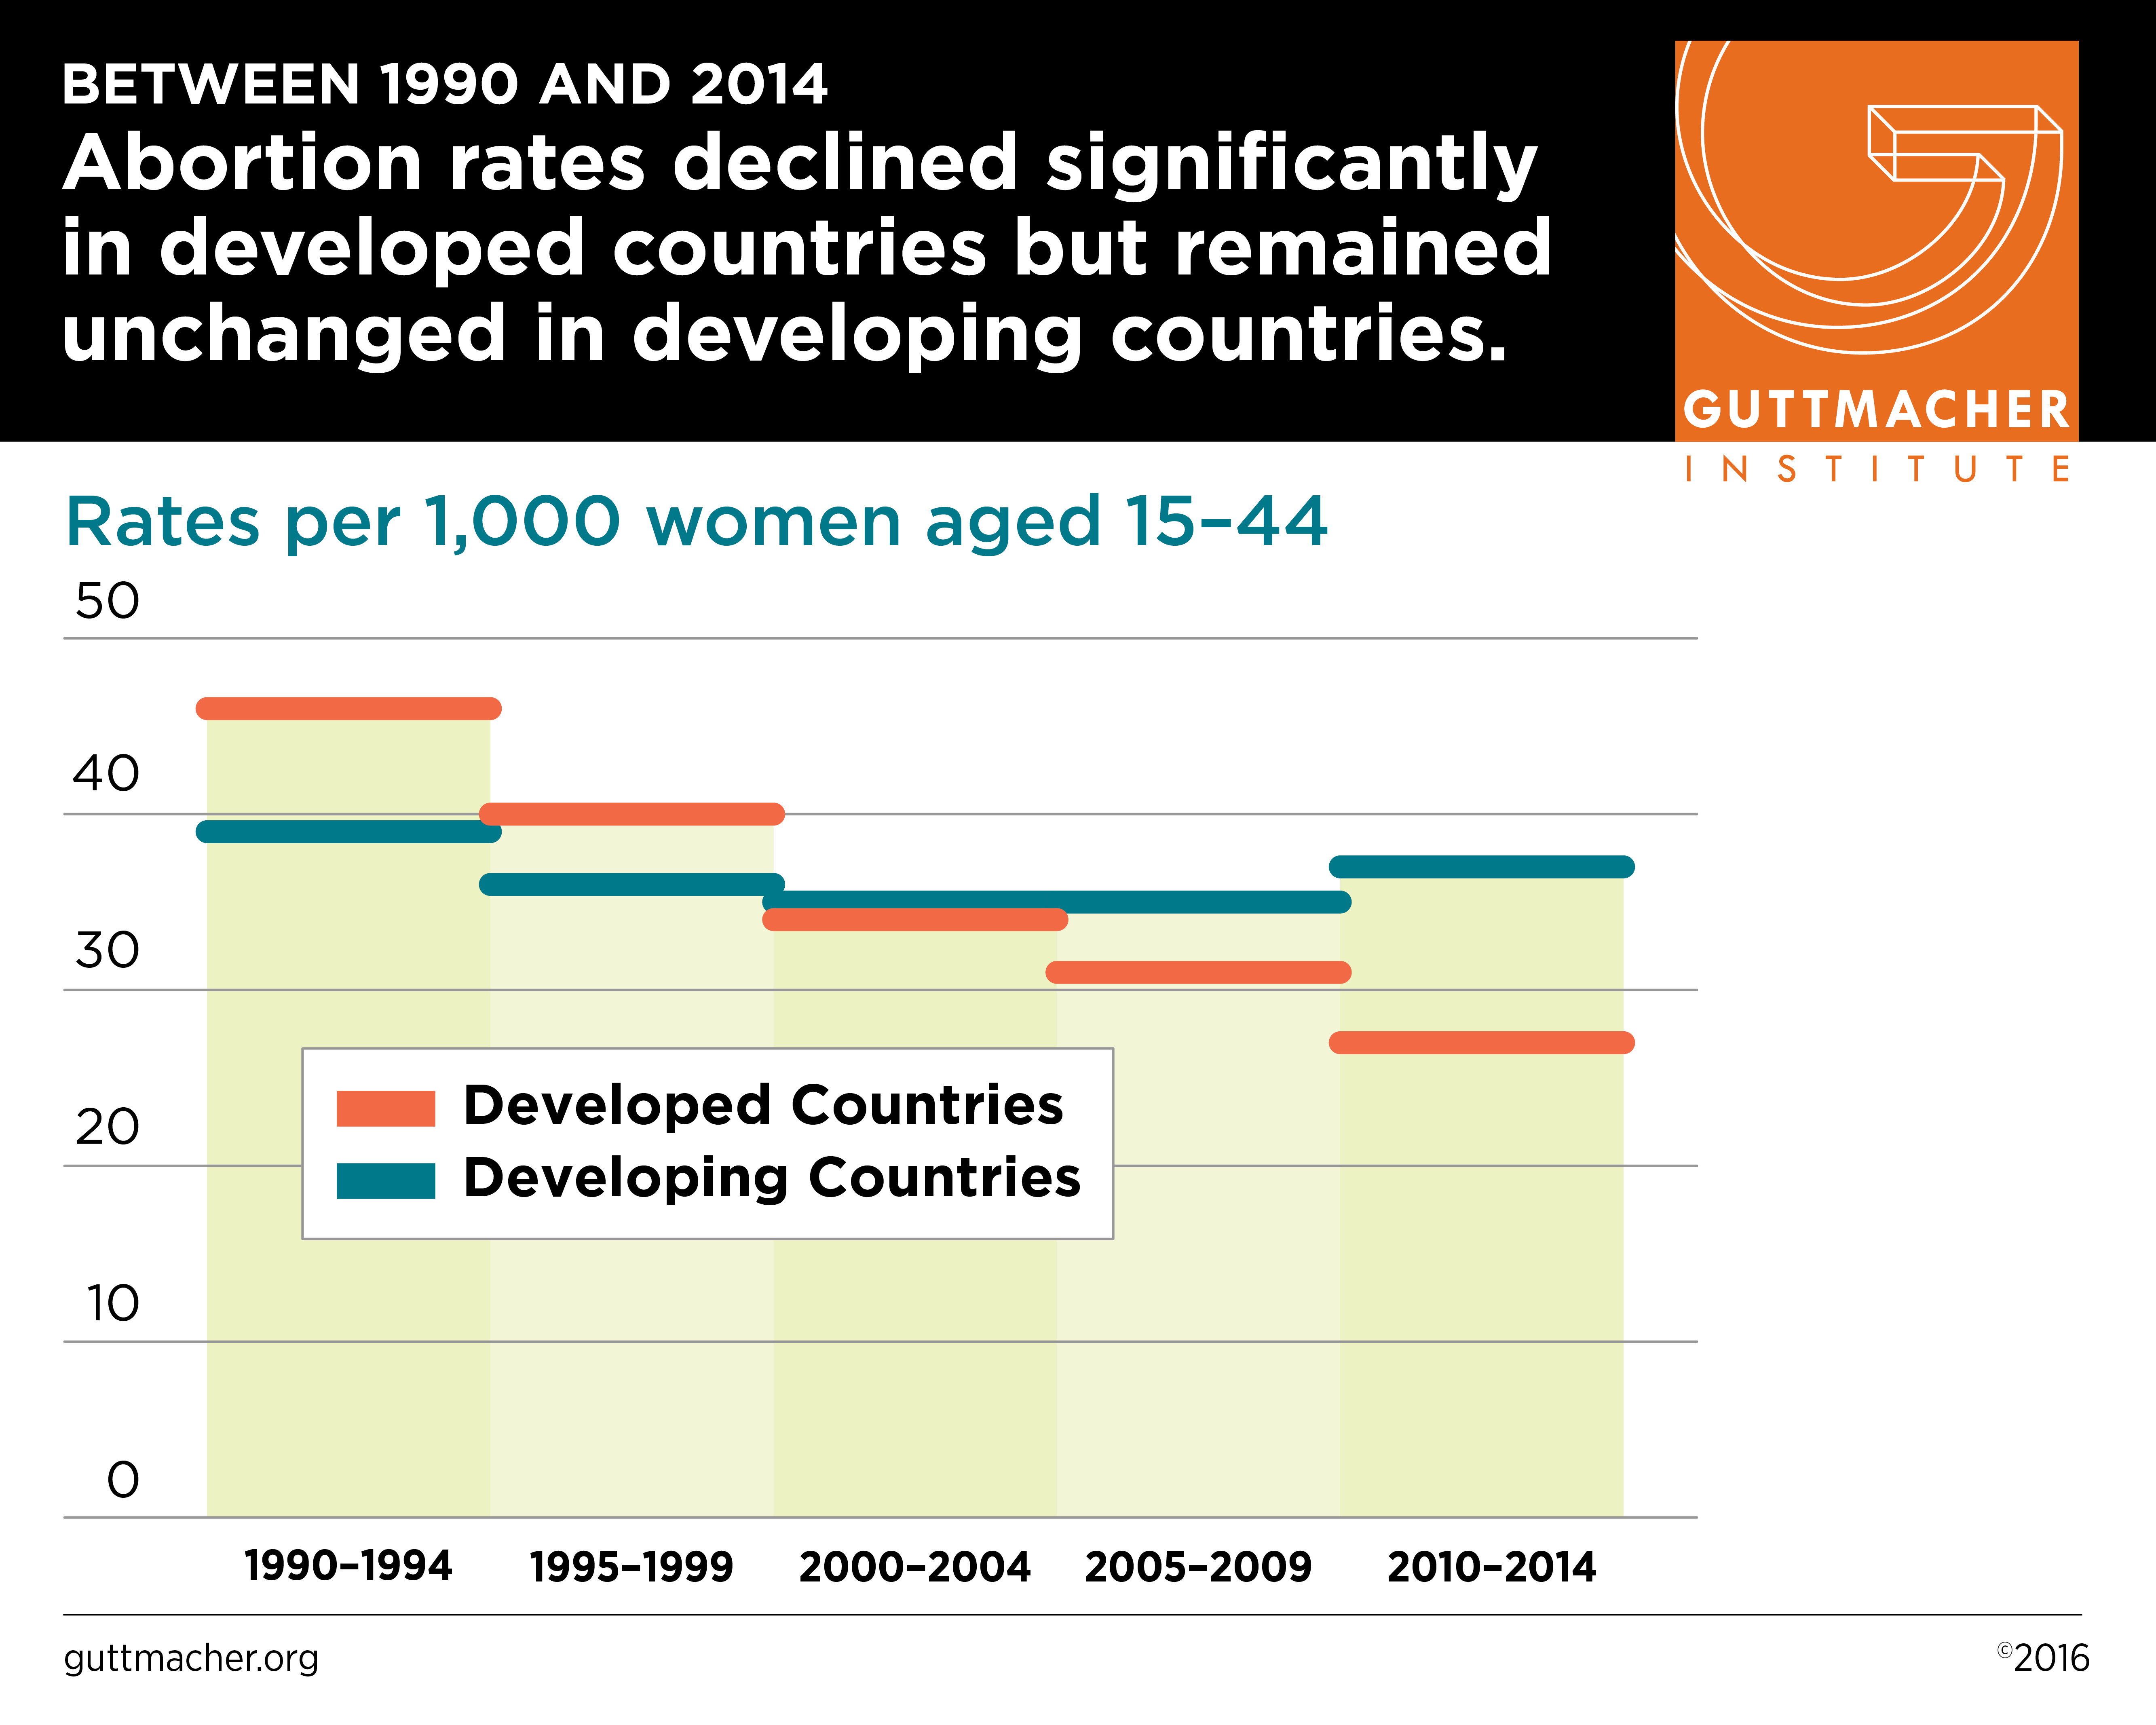 BETWEEN 1990 AND 2014 Abortion rates declined significantly in developed countries but remained unchanged in developing countries